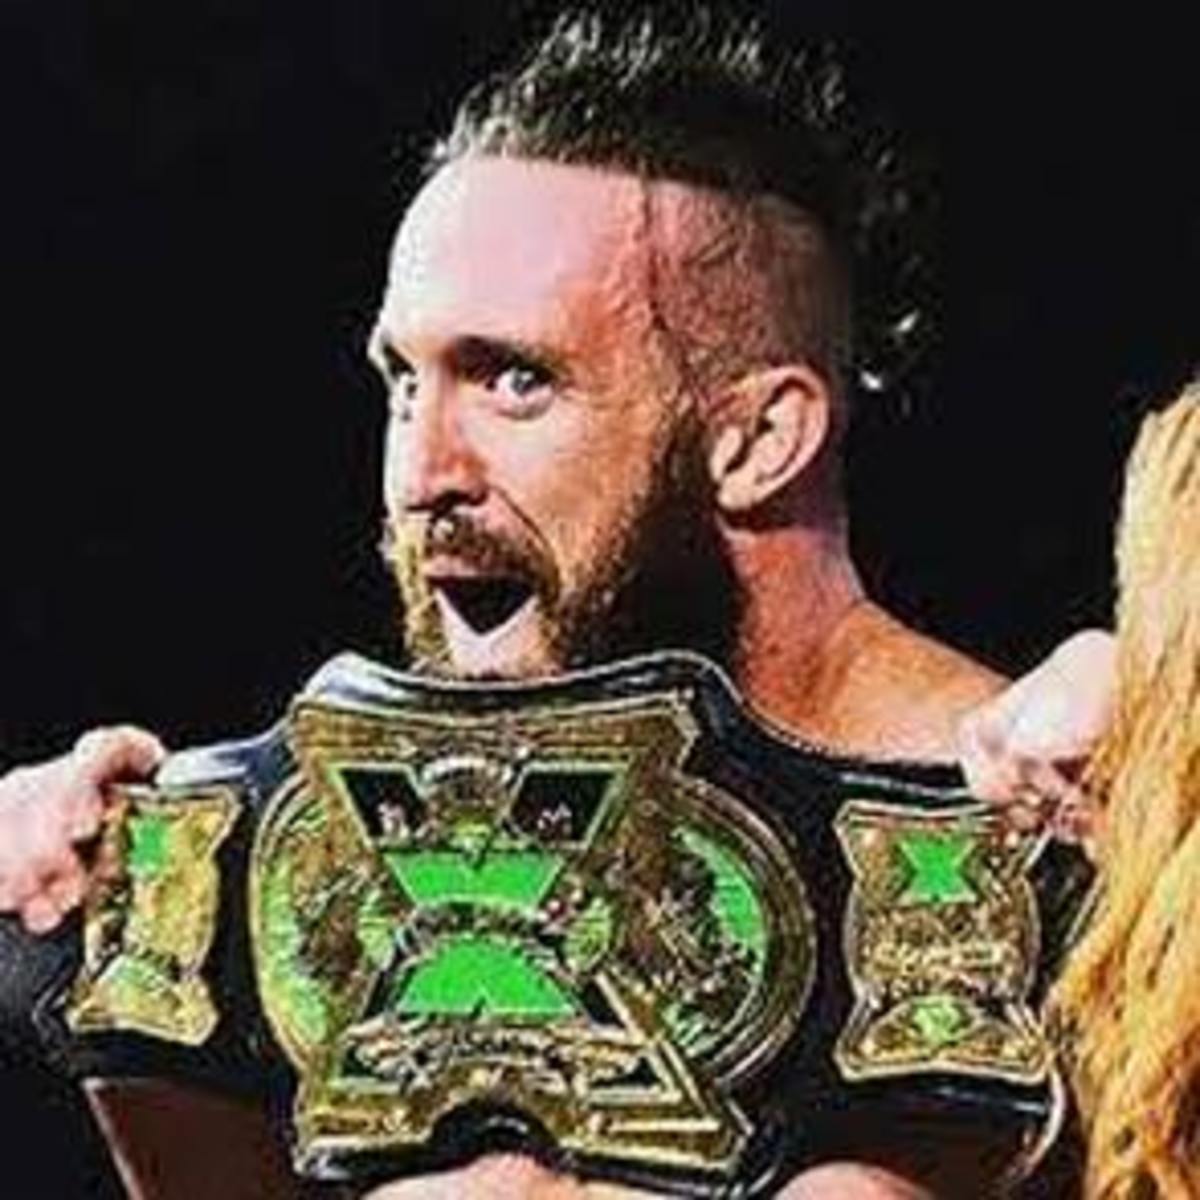 Mike Bennett Wins The X Division Championship